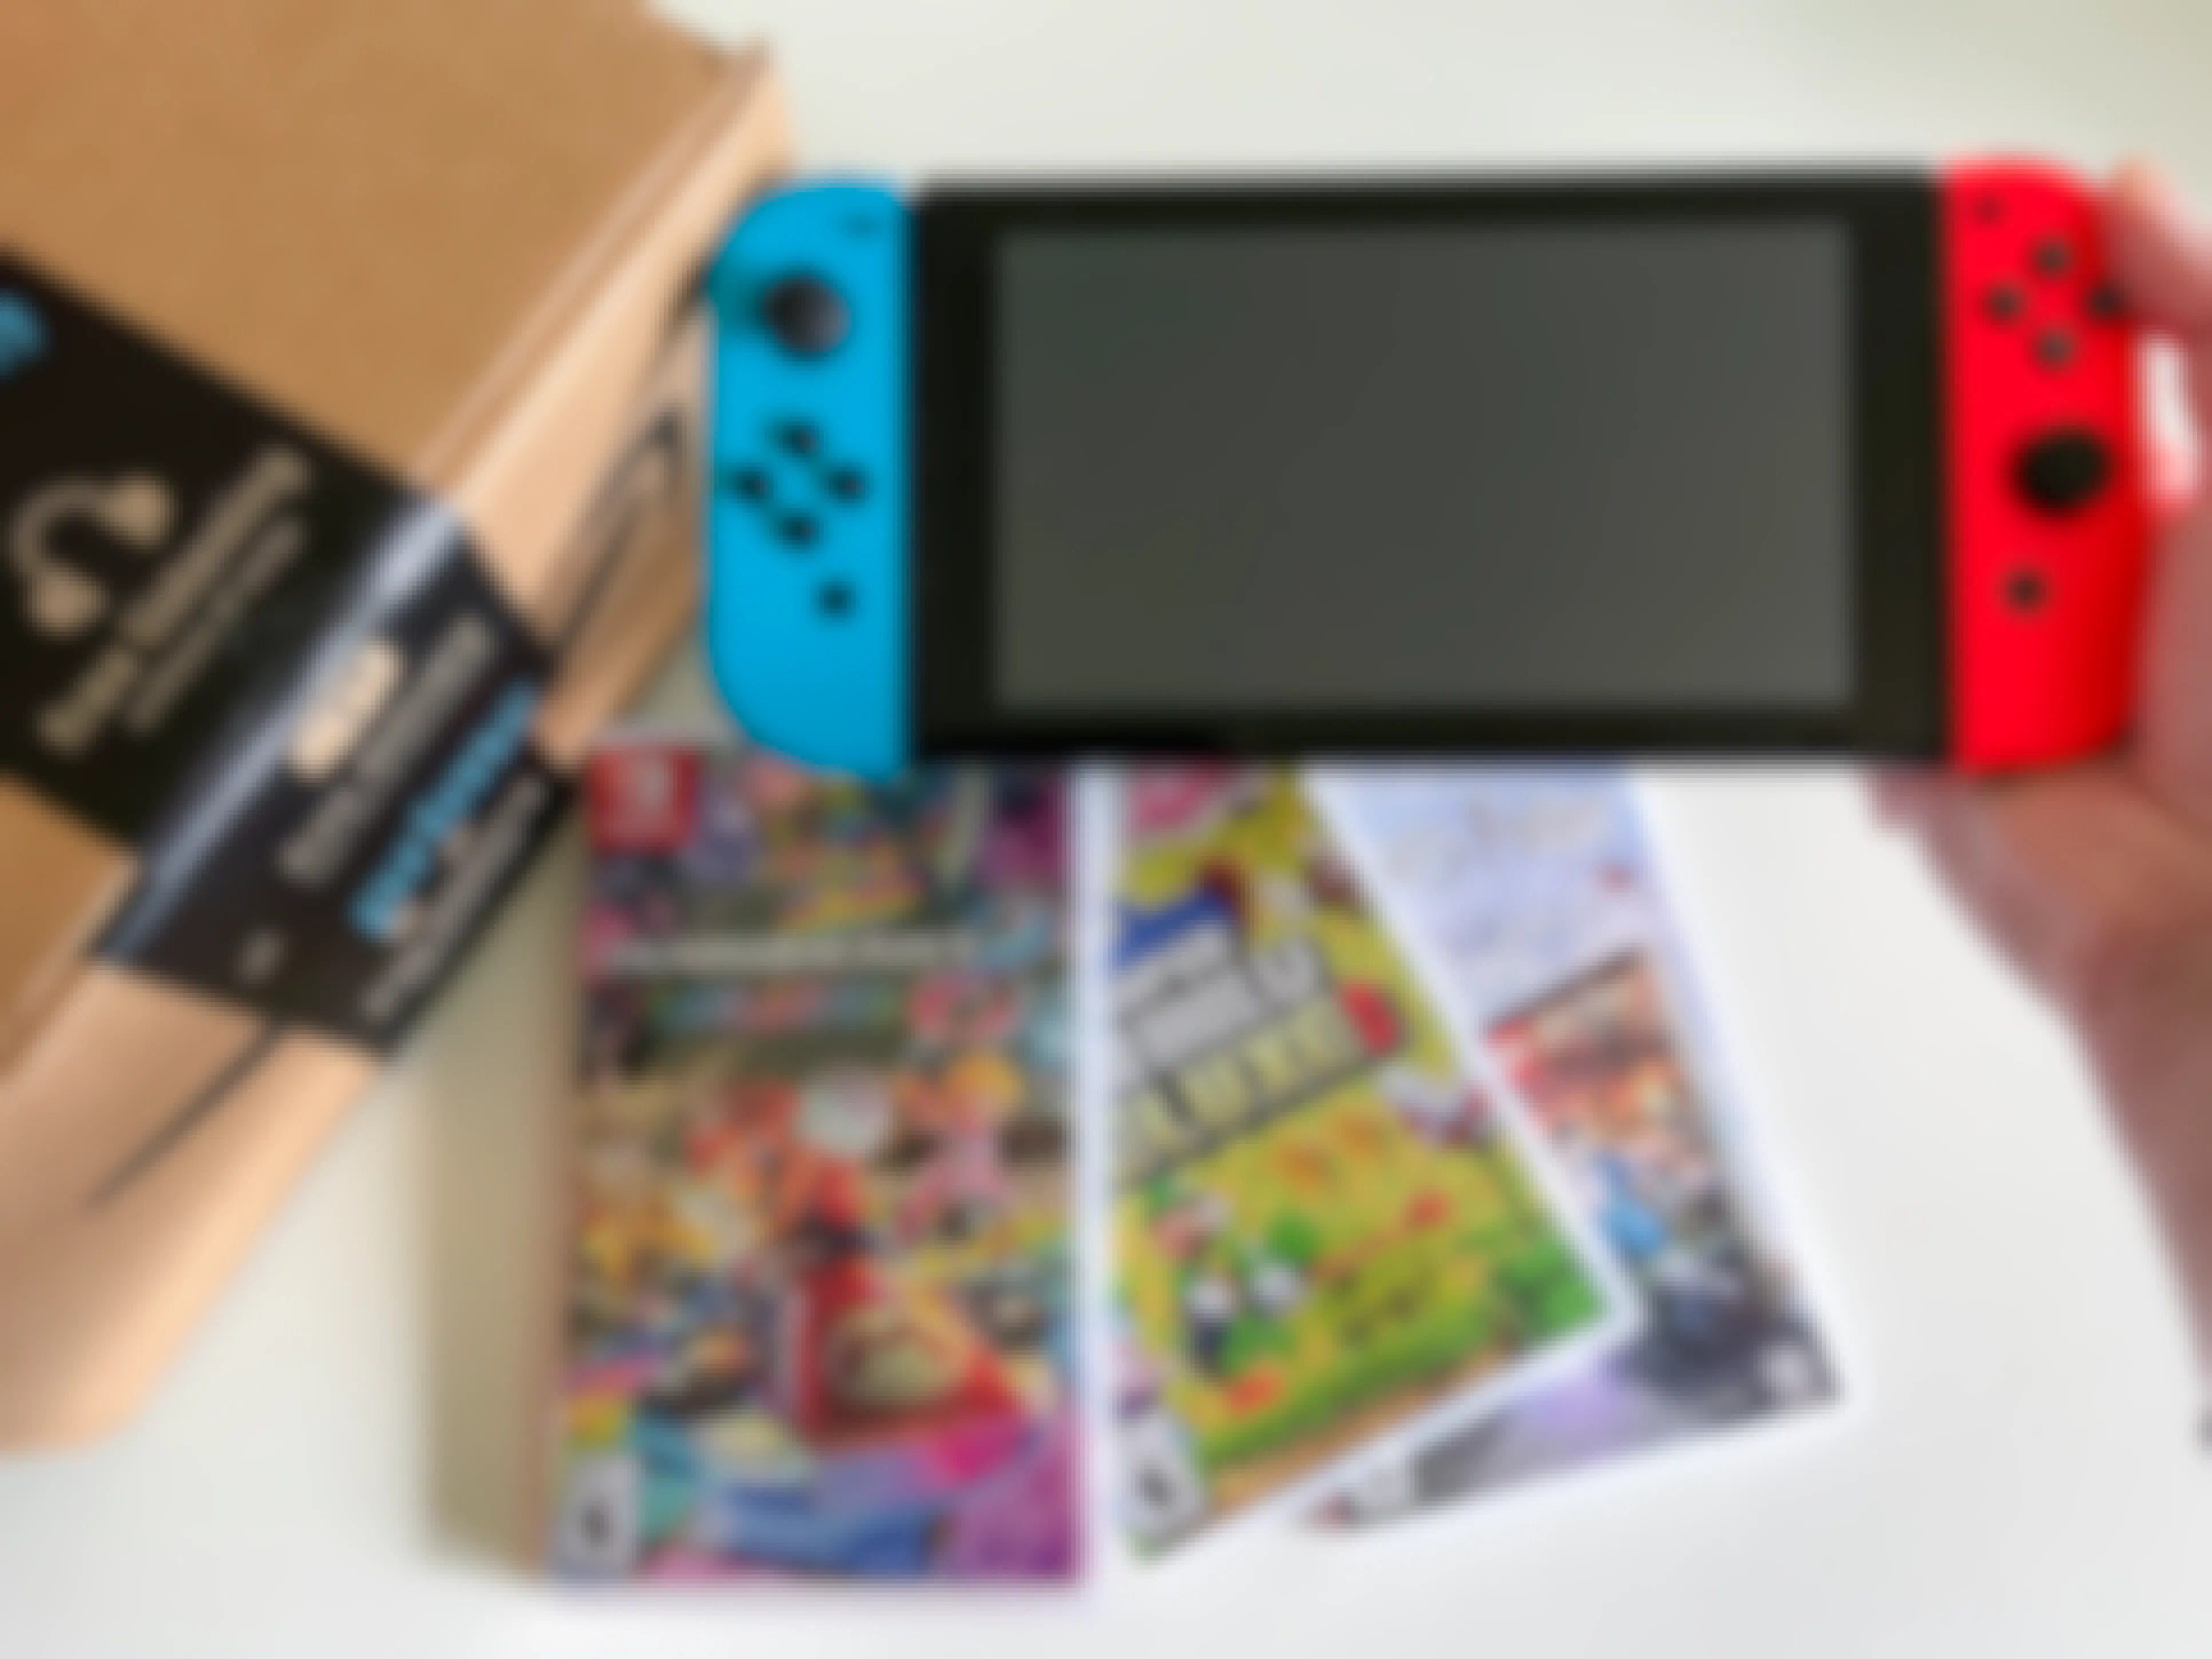 nintendo switch oled restock - A person's hand holding up a Nintendo Switch next to an Amazon box with three Switch games below it.